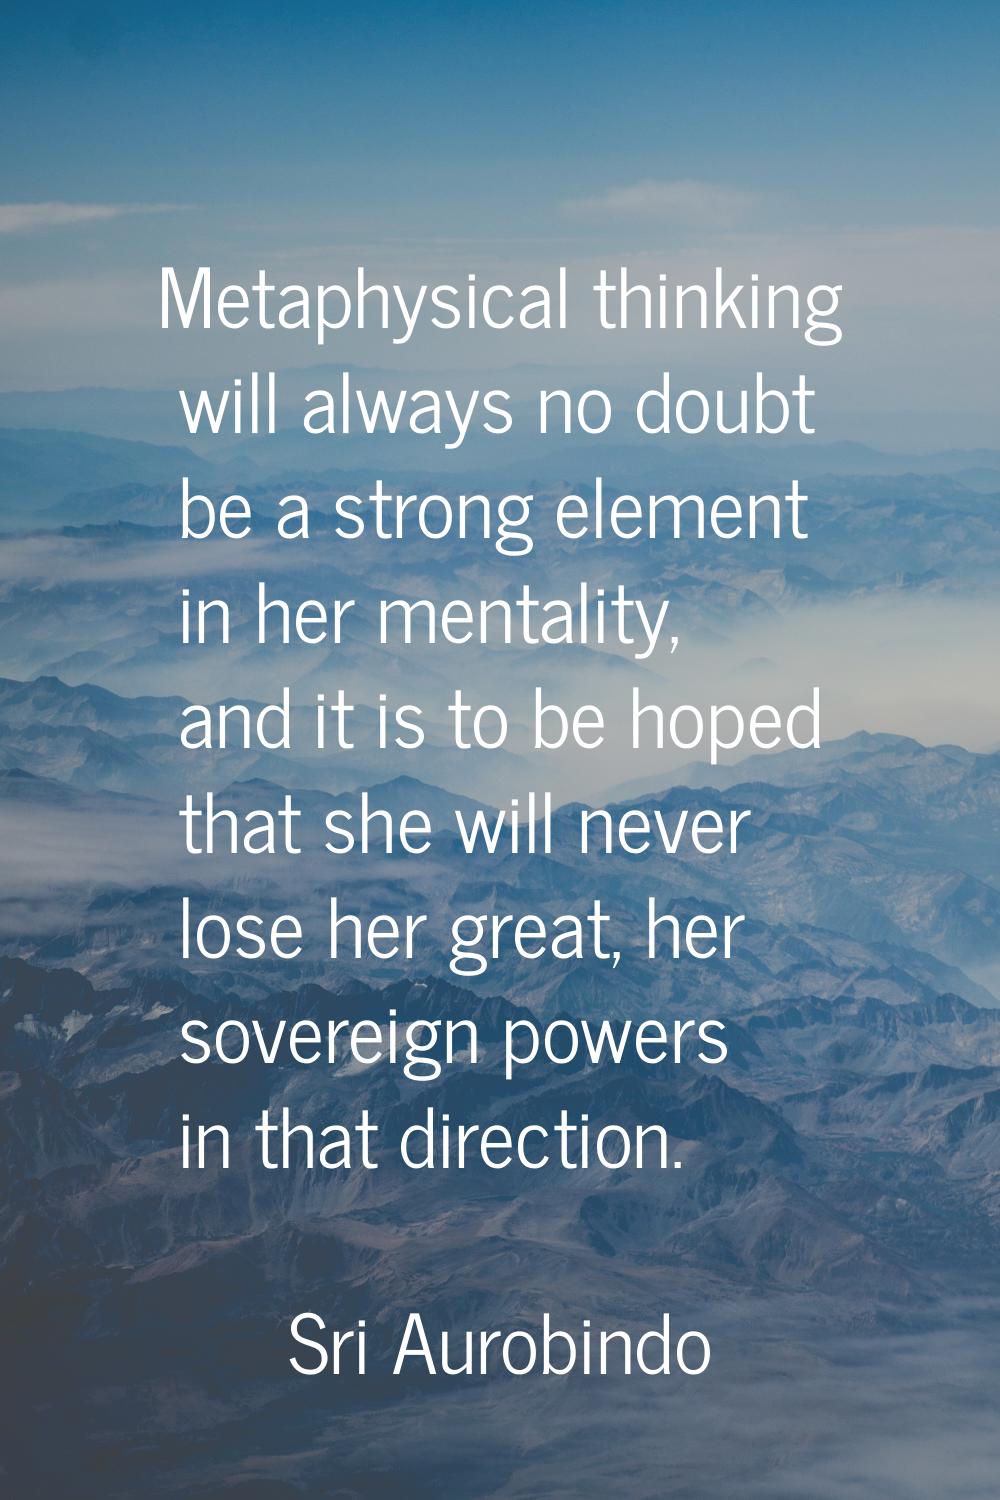 Metaphysical thinking will always no doubt be a strong element in her mentality, and it is to be ho